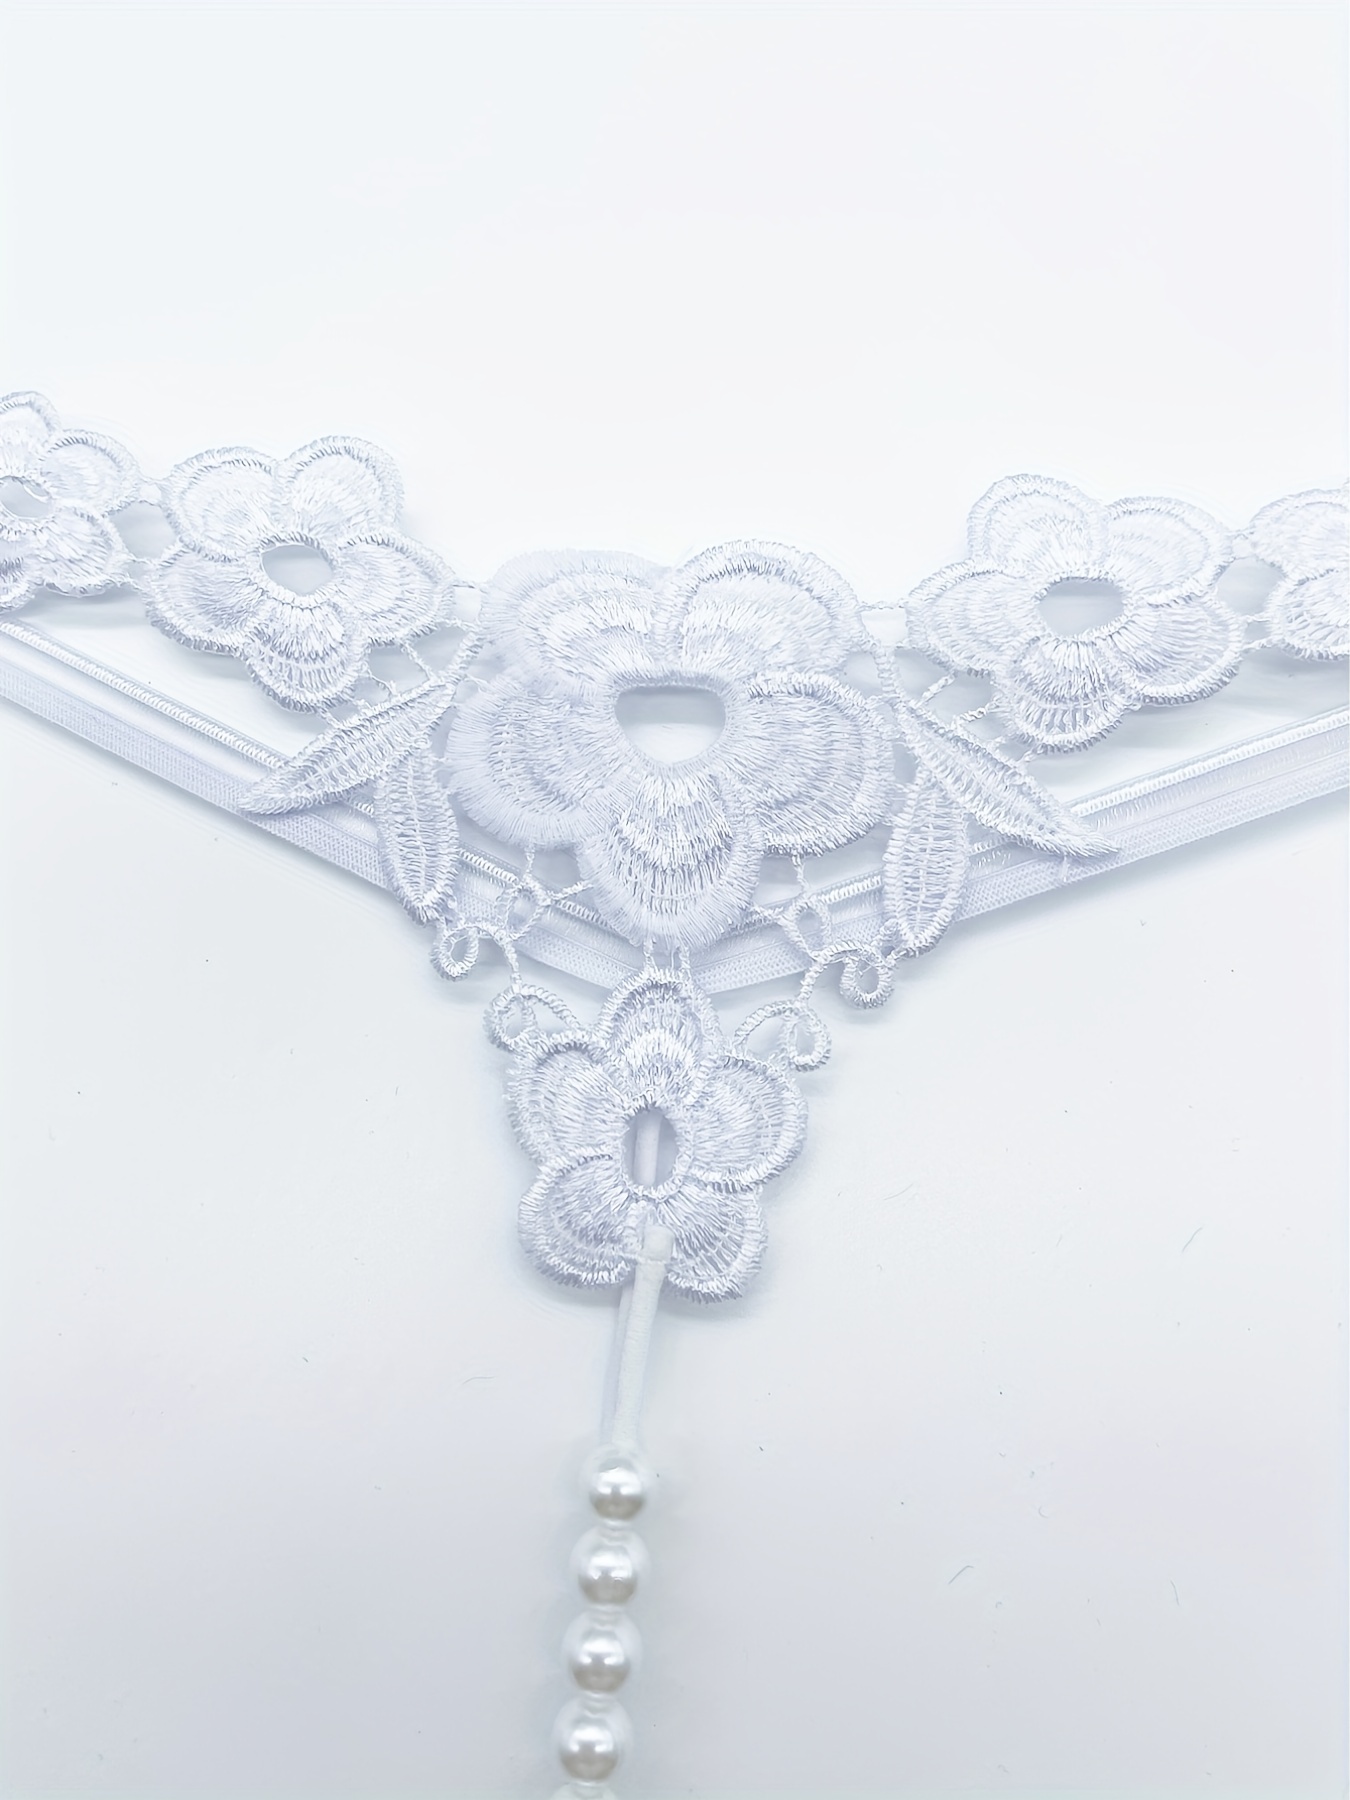  lace pearl panties  embroidered lace thongs (S, black) :  Handmade Products